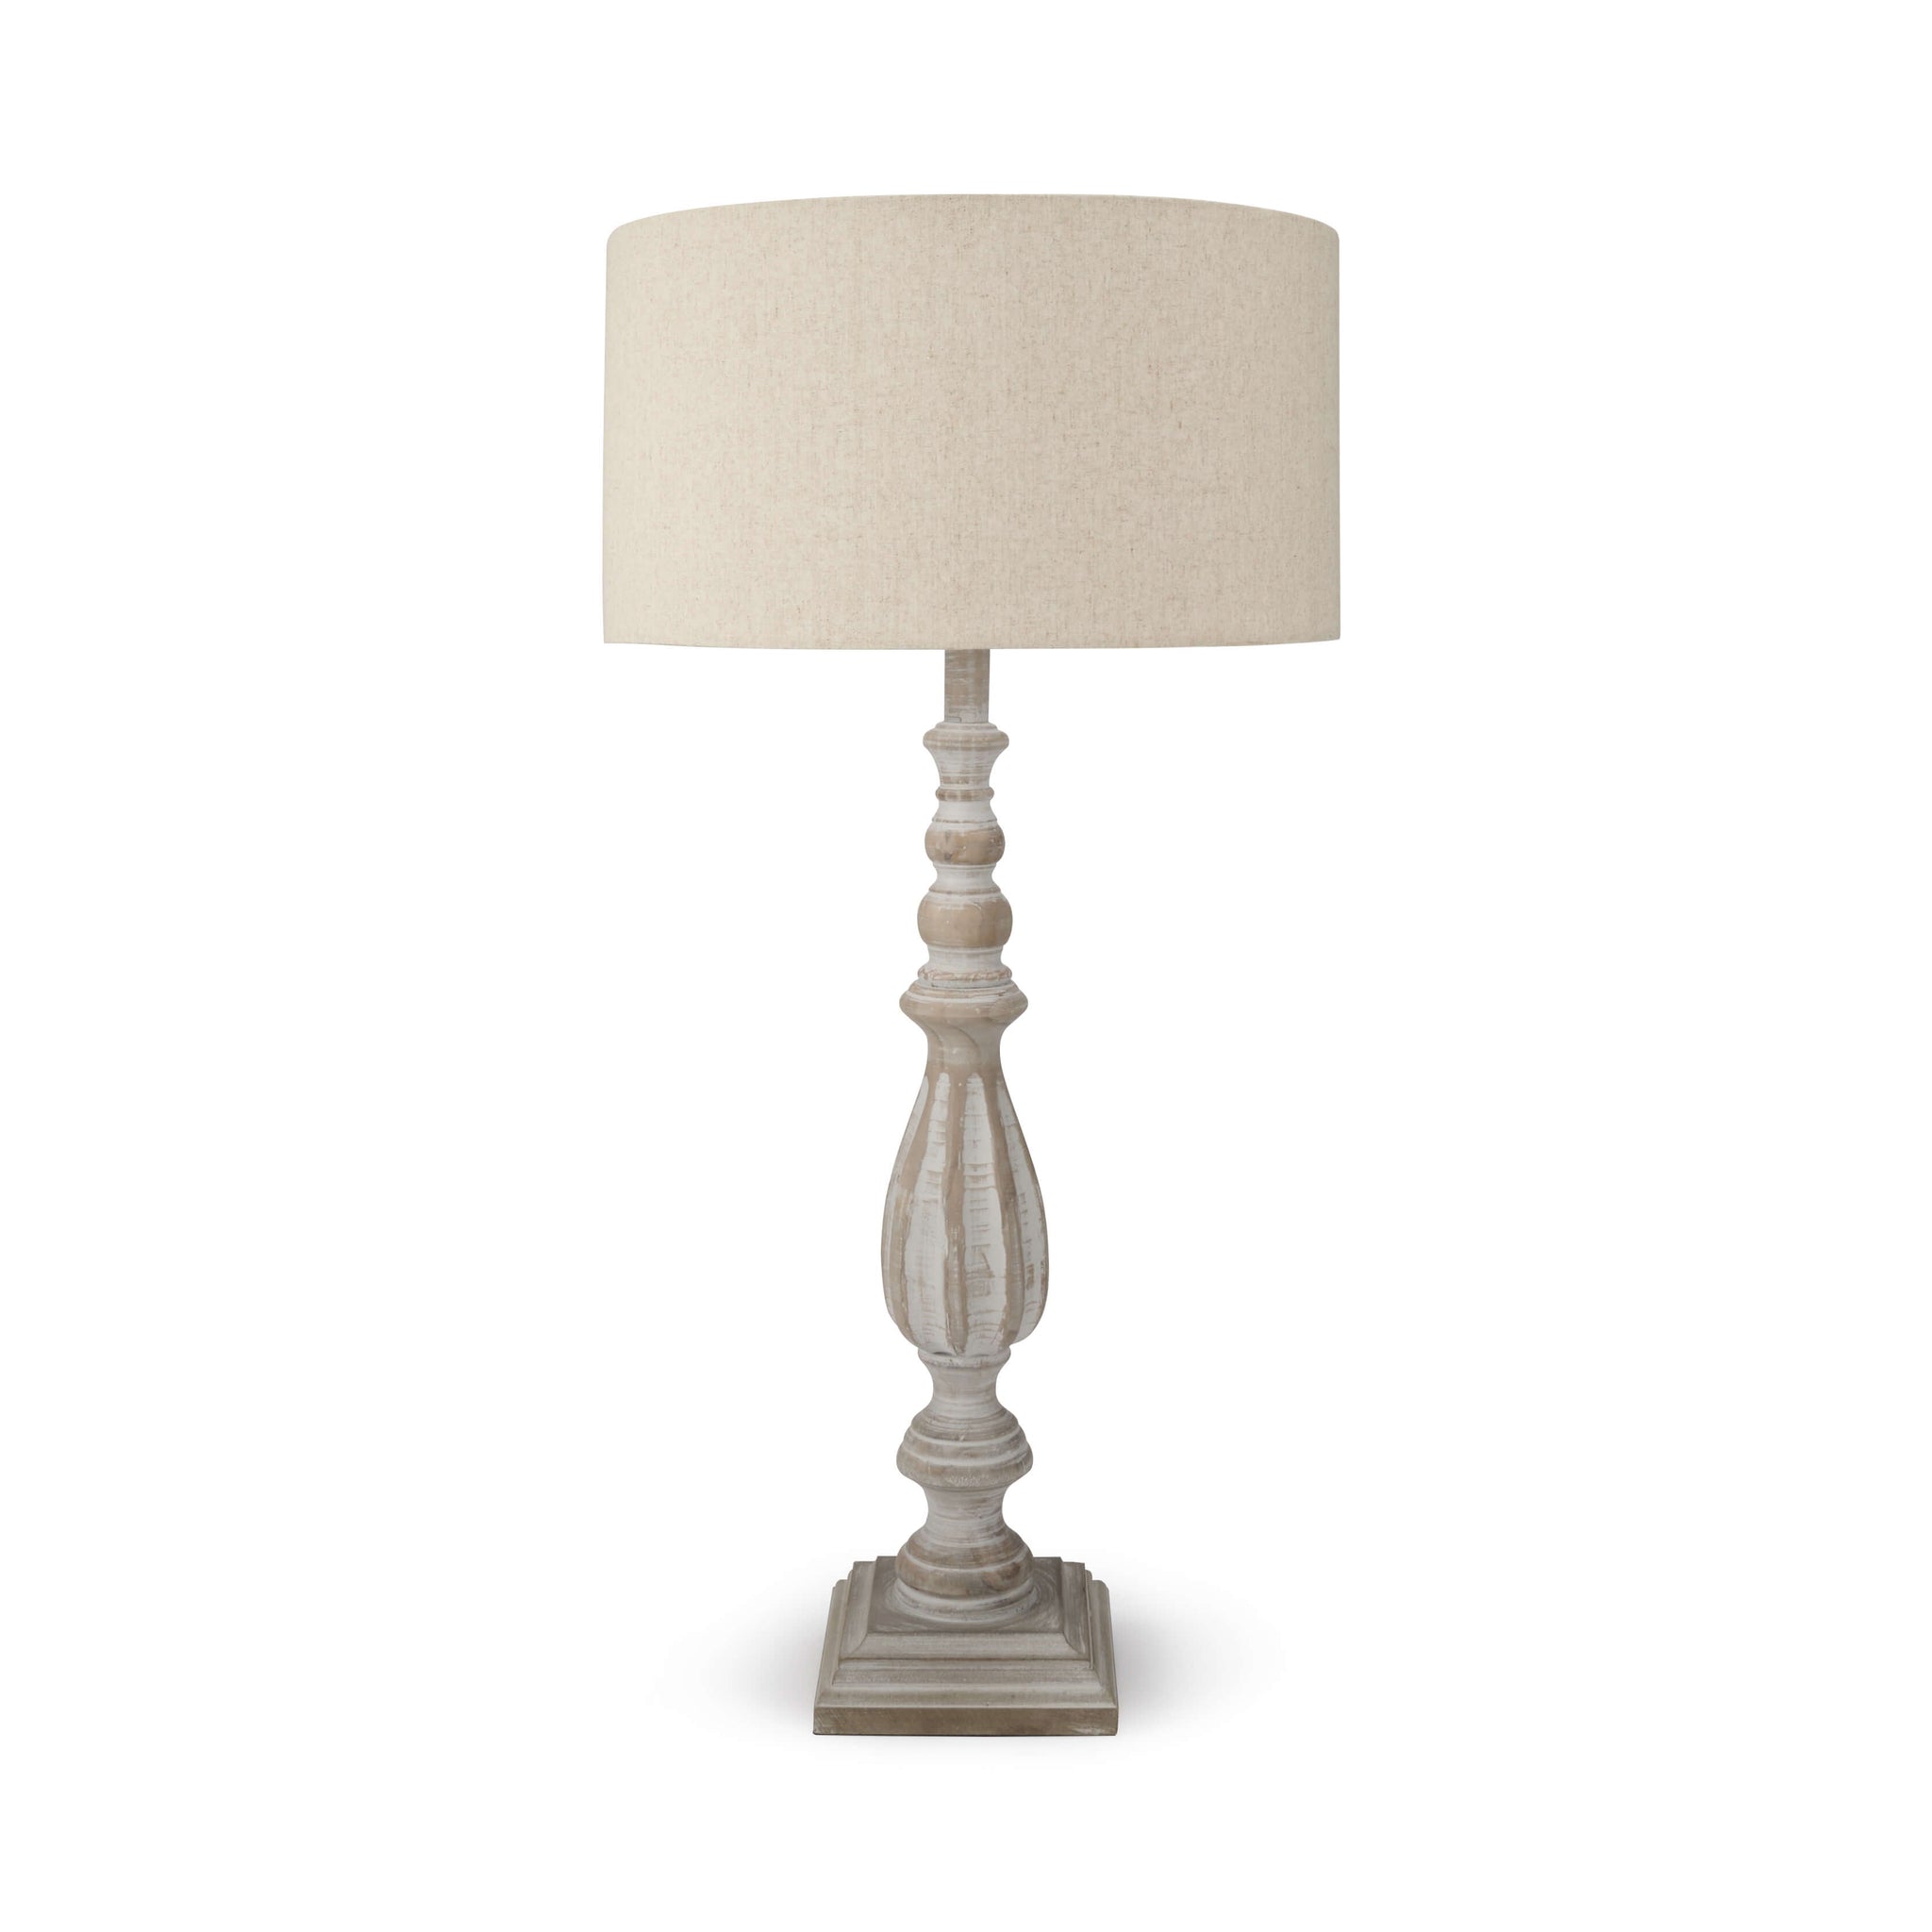 Sophie Allport Witham Table Lamp